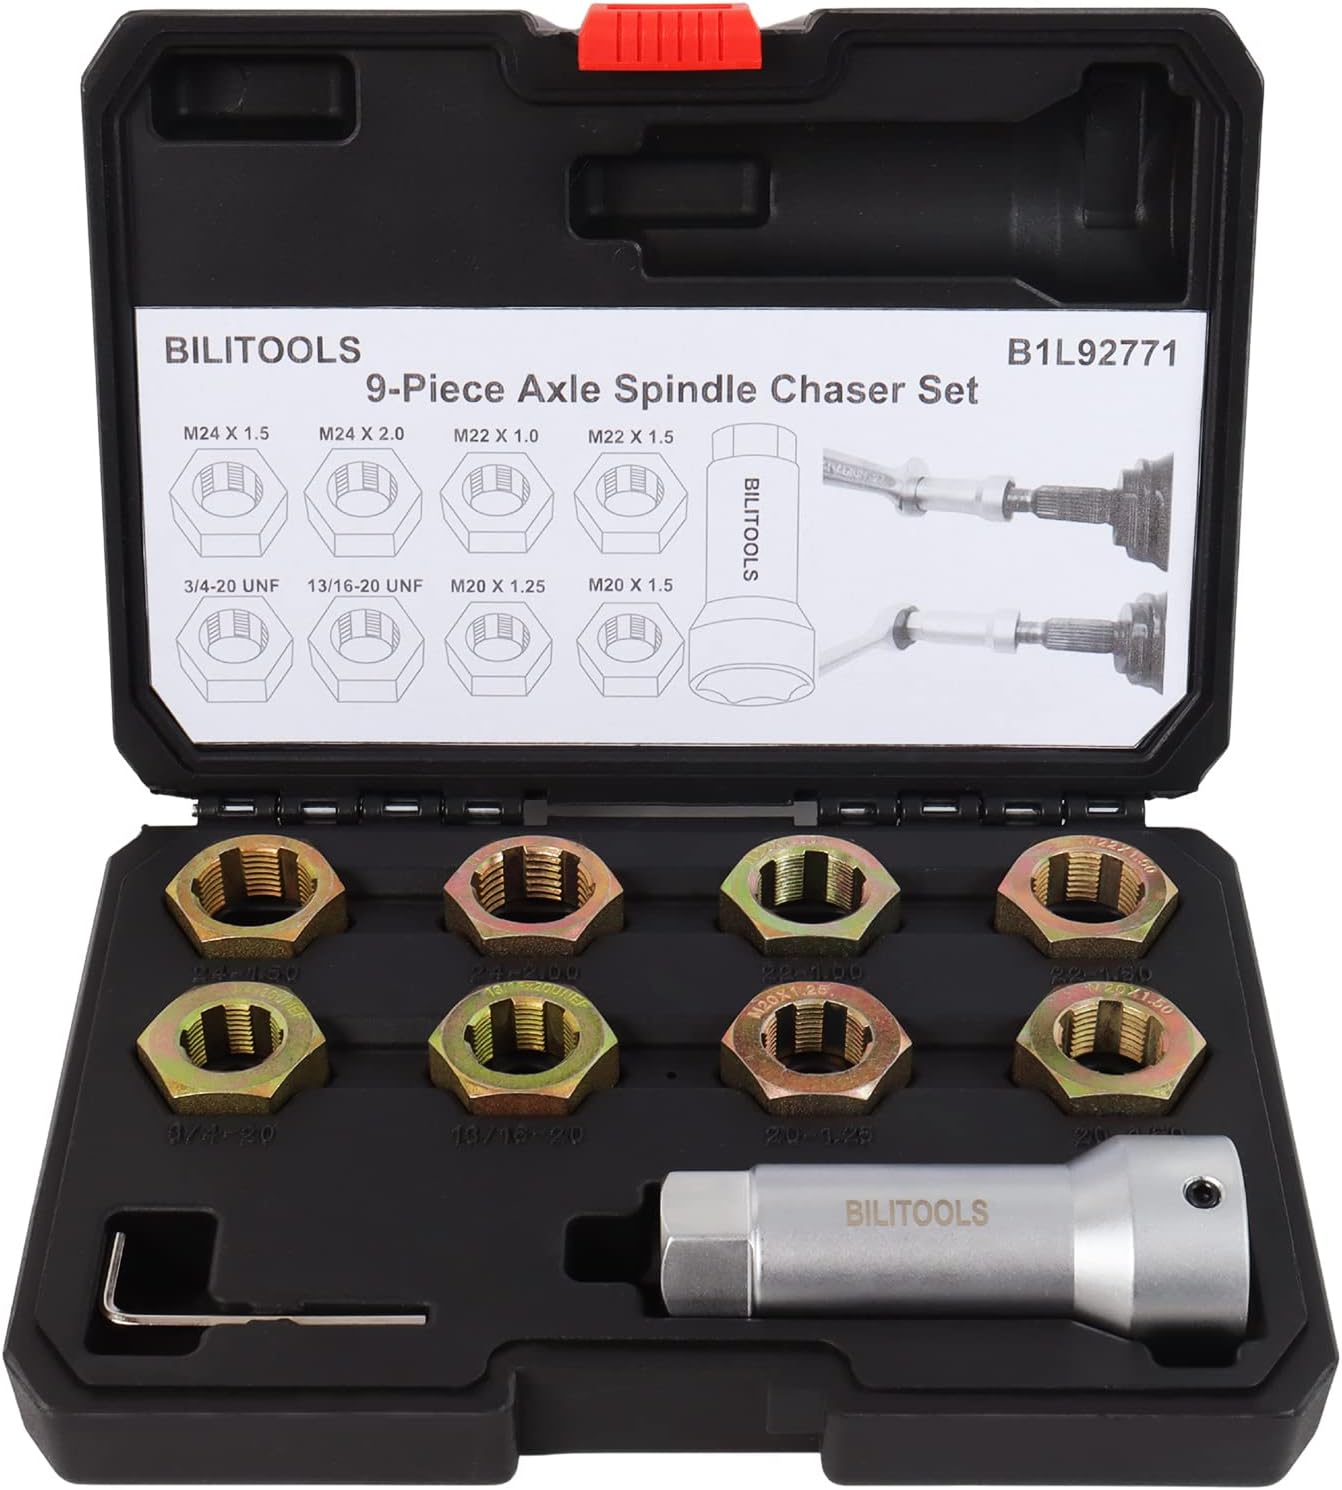 BILITOOLS 9-Piece Axle Spindle Thread Chaser Set, Thread